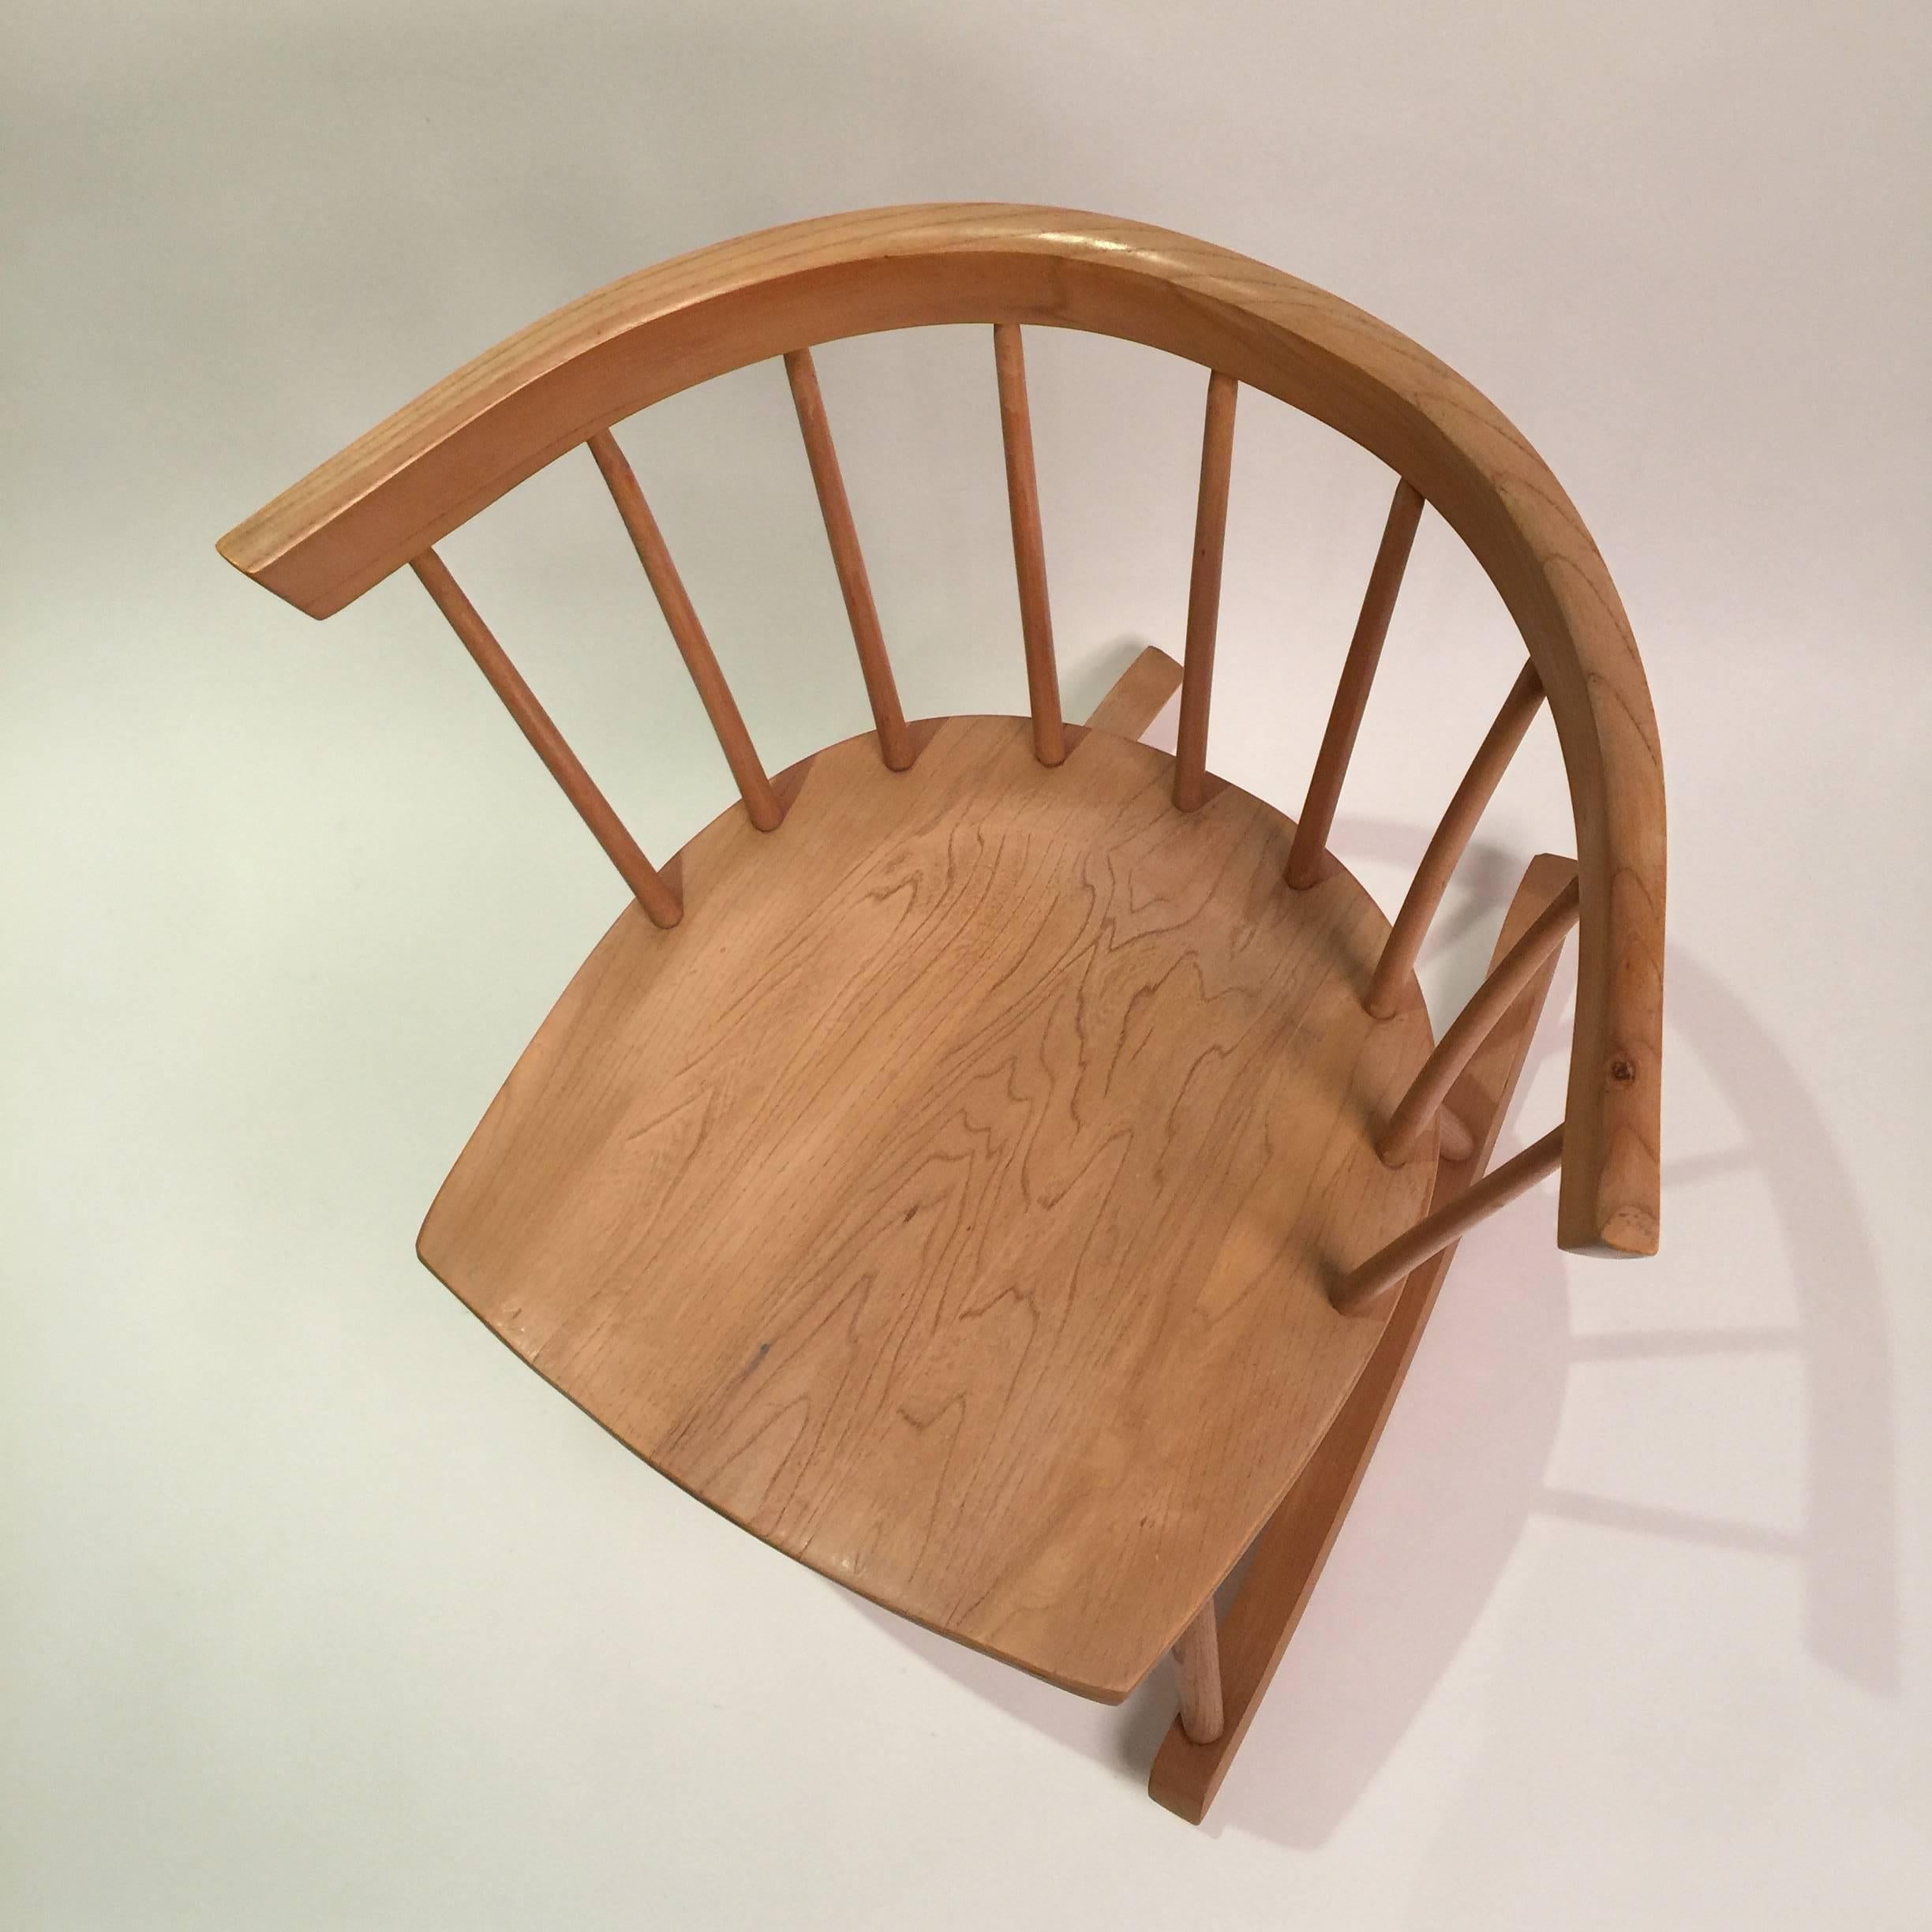 George Nakashima straight rocking chair produced in the United Kingdom by Ercol and sold by Knoll. Classic windsor style echoing McCobb and Nakashima designs.
 